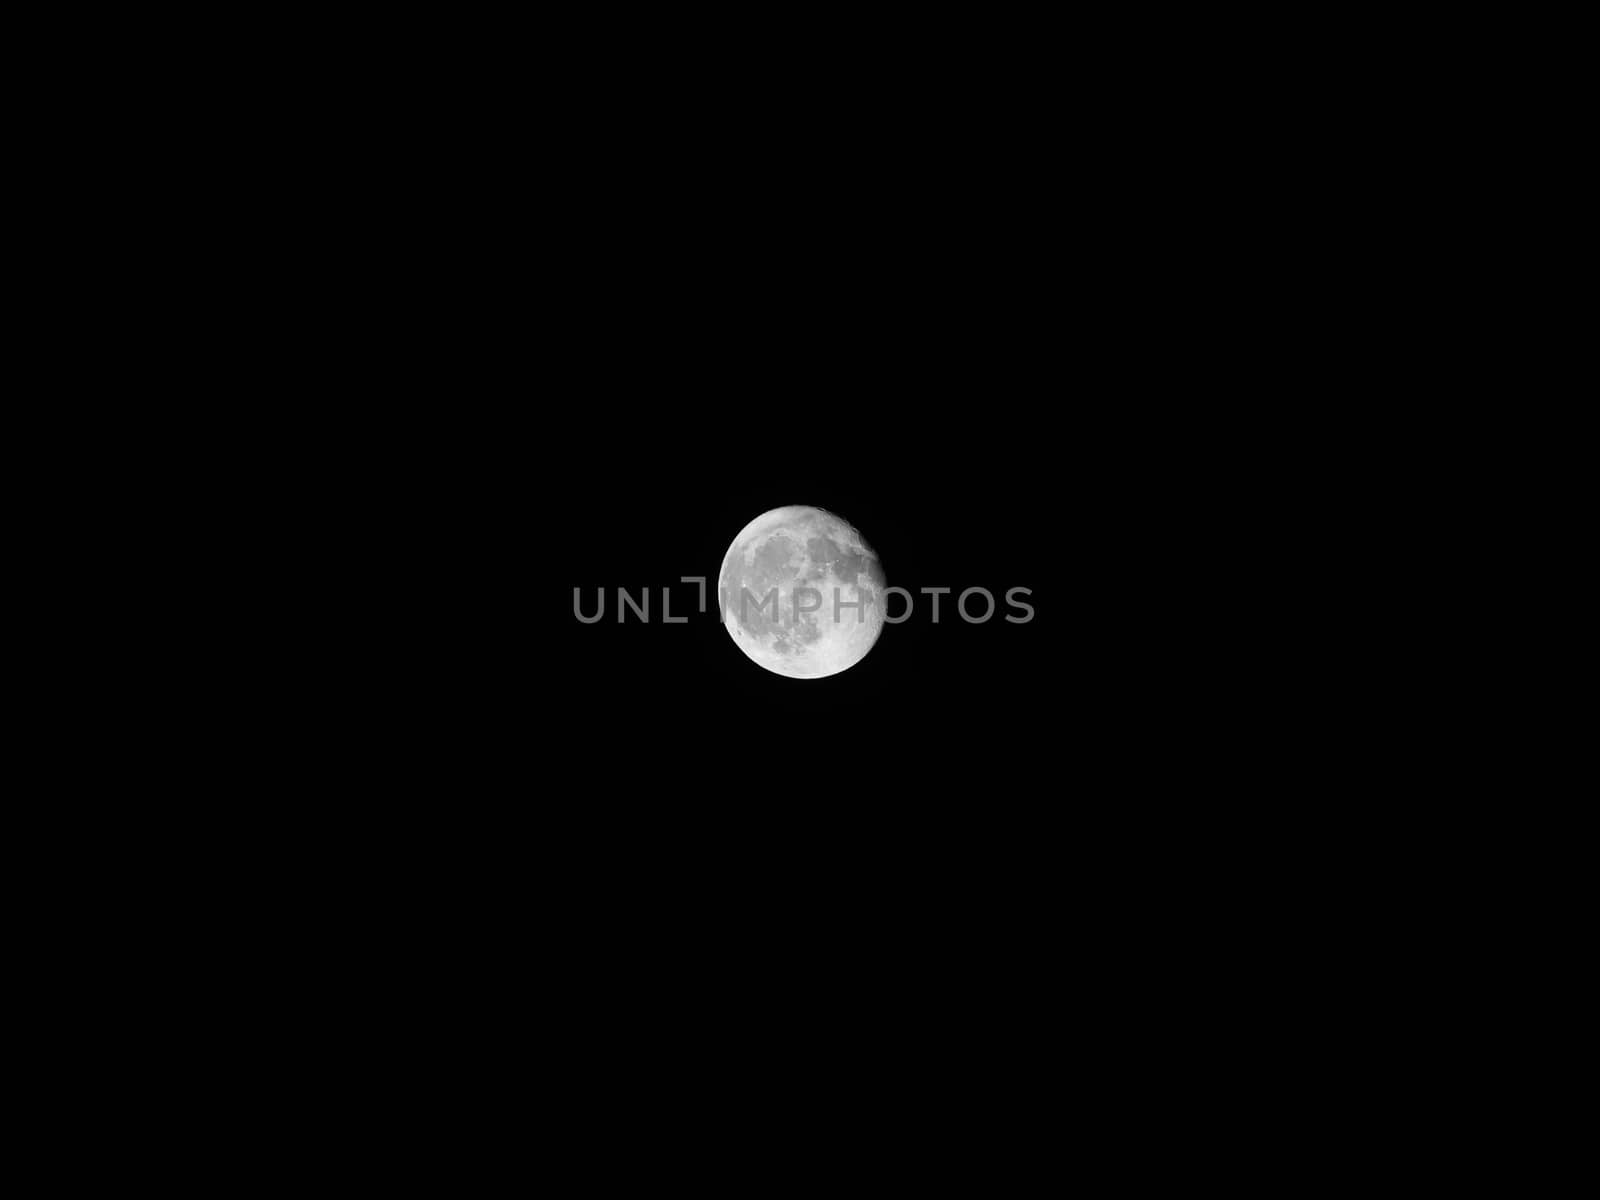 Big round circular sphere close up circle body of full white moon at dark night time clear sky on black background Seen through telescope. Planet universe astronomical galaxy space exploration concept